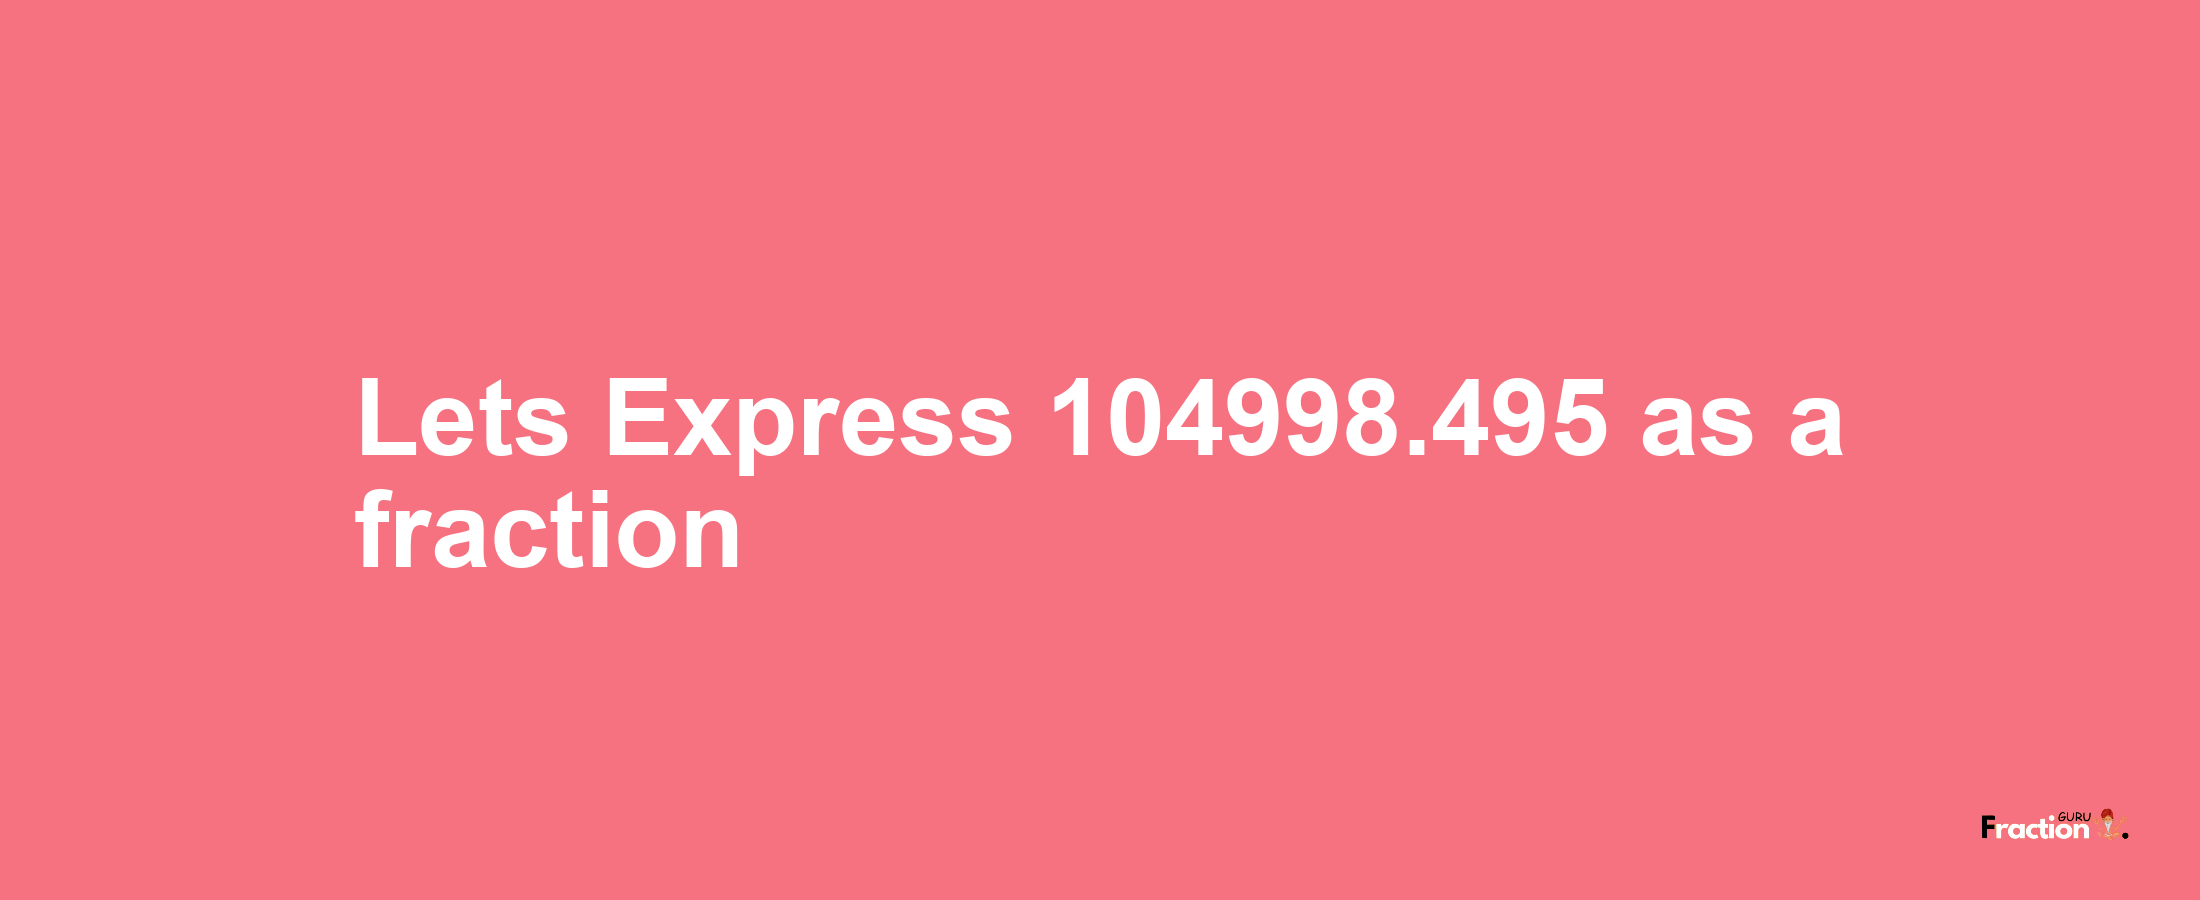 Lets Express 104998.495 as afraction